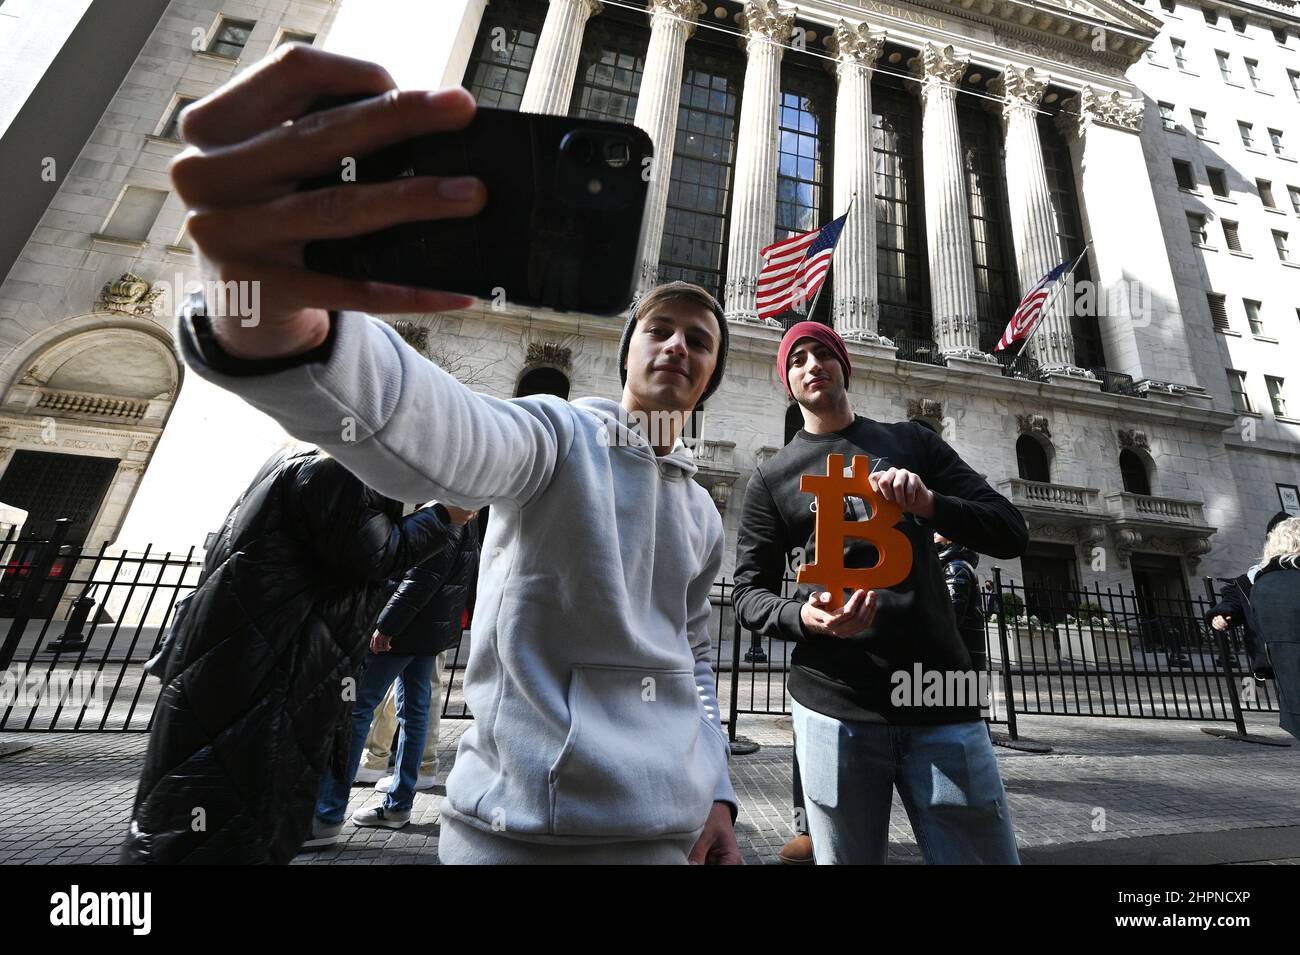 New York, USA. 22nd Feb, 2022. Friends photograph themselves with the Bitcoin currency emblem (by artist Leonid Sukala) in front of the New York Stock Exchange as the DOW reacts to the news that Russian President Vladimir Putin ordered troops into Ukraine, New York, NY, February 22, 2022. Stocks tumbled as crude oil price surged while the United States and its allies announced economic sanctions against Russia for its incursion into Ukraine. (Photo by Anthony Behar/Sipa USA) Credit: Sipa USA/Alamy Live News Stock Photo